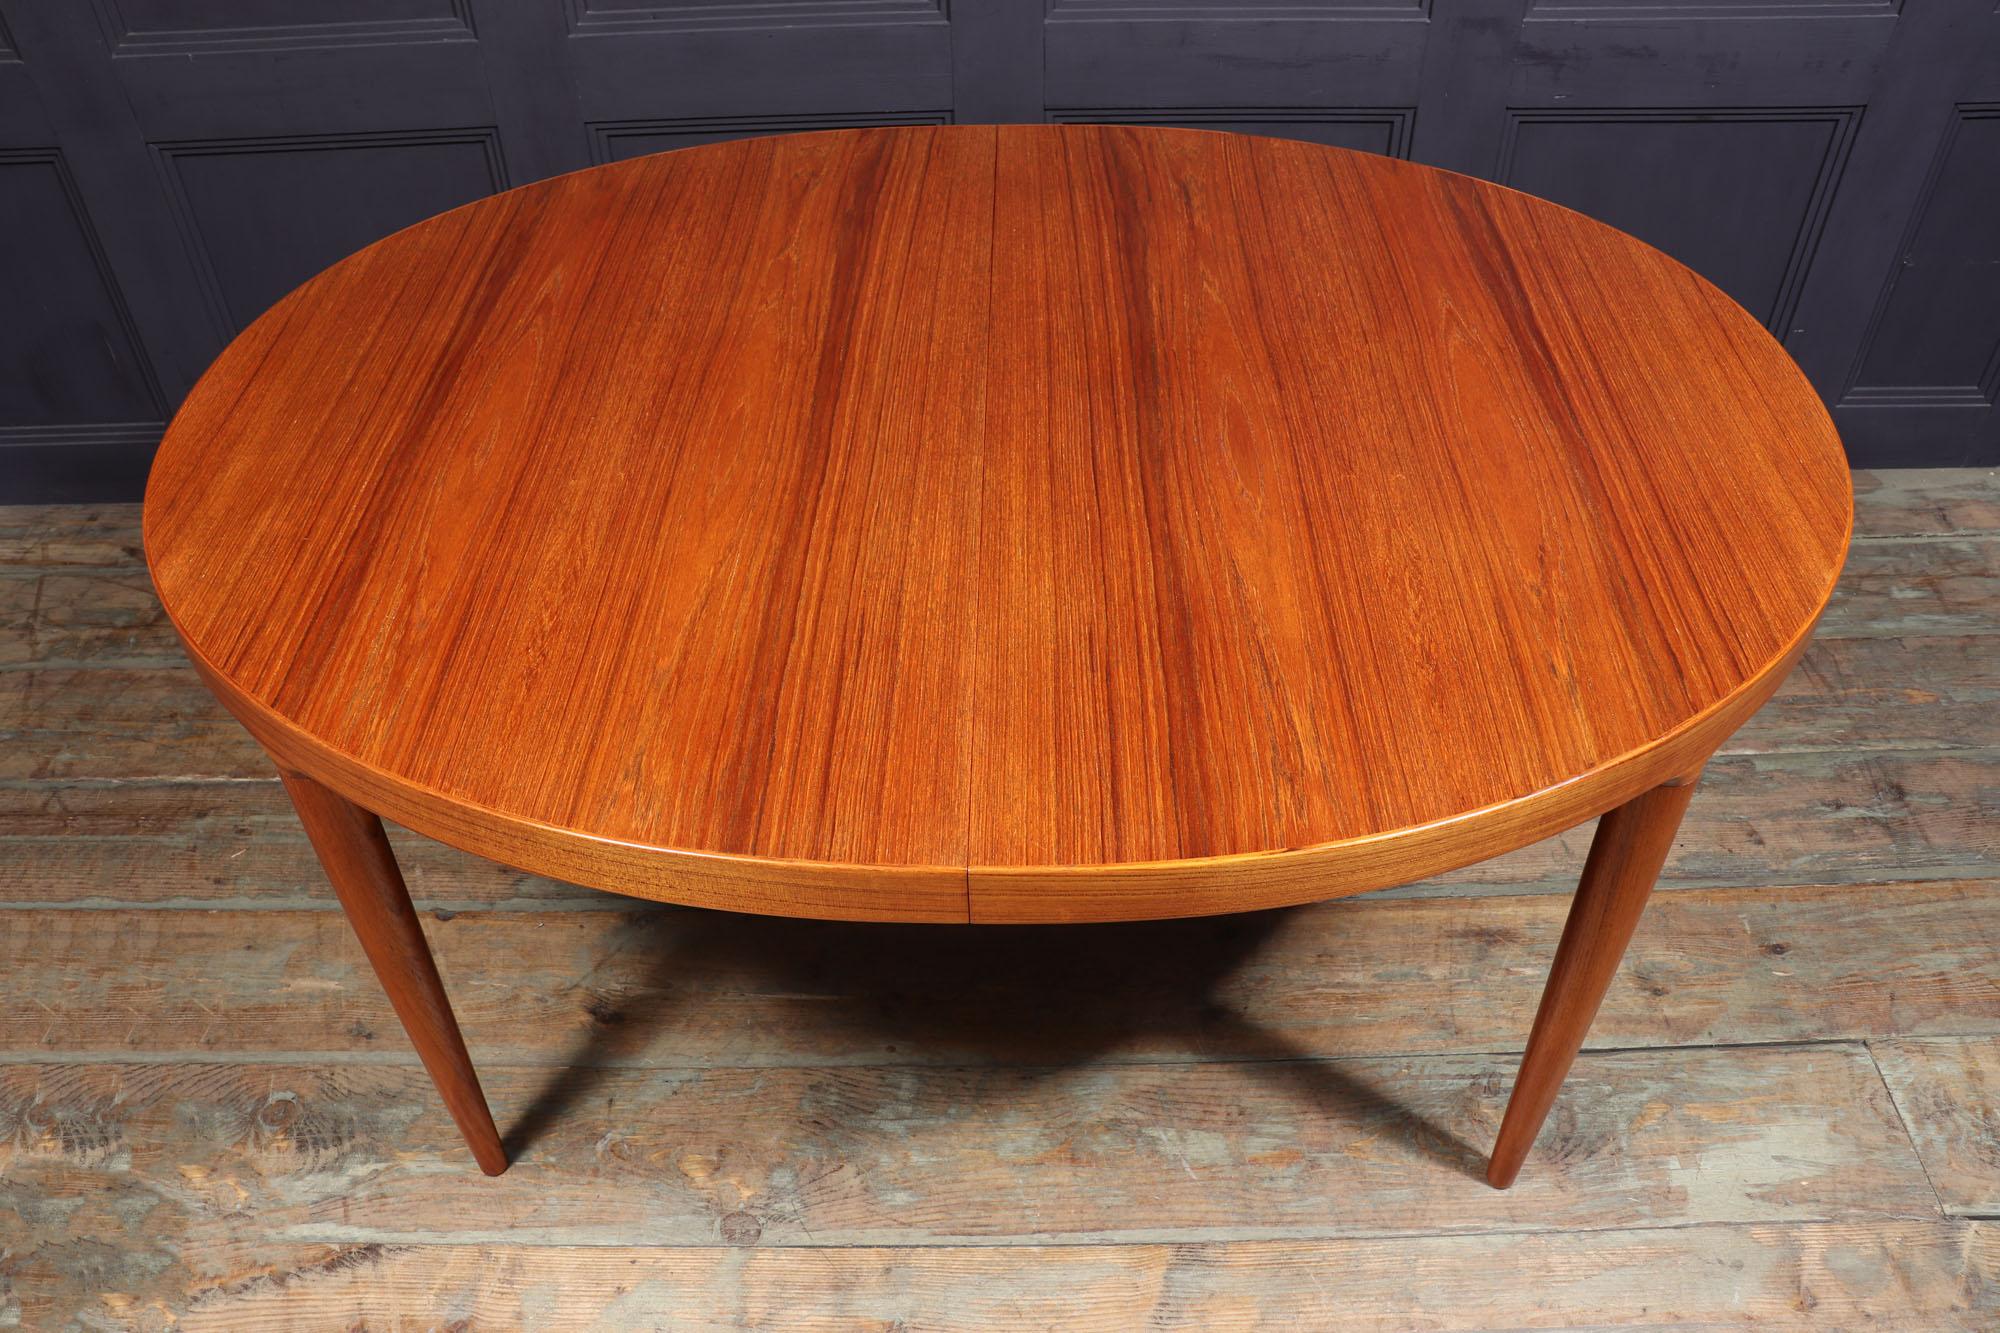 DINING TABLE BY JOHANNES ANDERSEN 
This teak extending dining table manufactured by Skovmand & Andersen in Denmark is a functional and well-crafted vintage piece. With a sturdy teak edging, tapering teak legs and a fantastic teak grain, the table